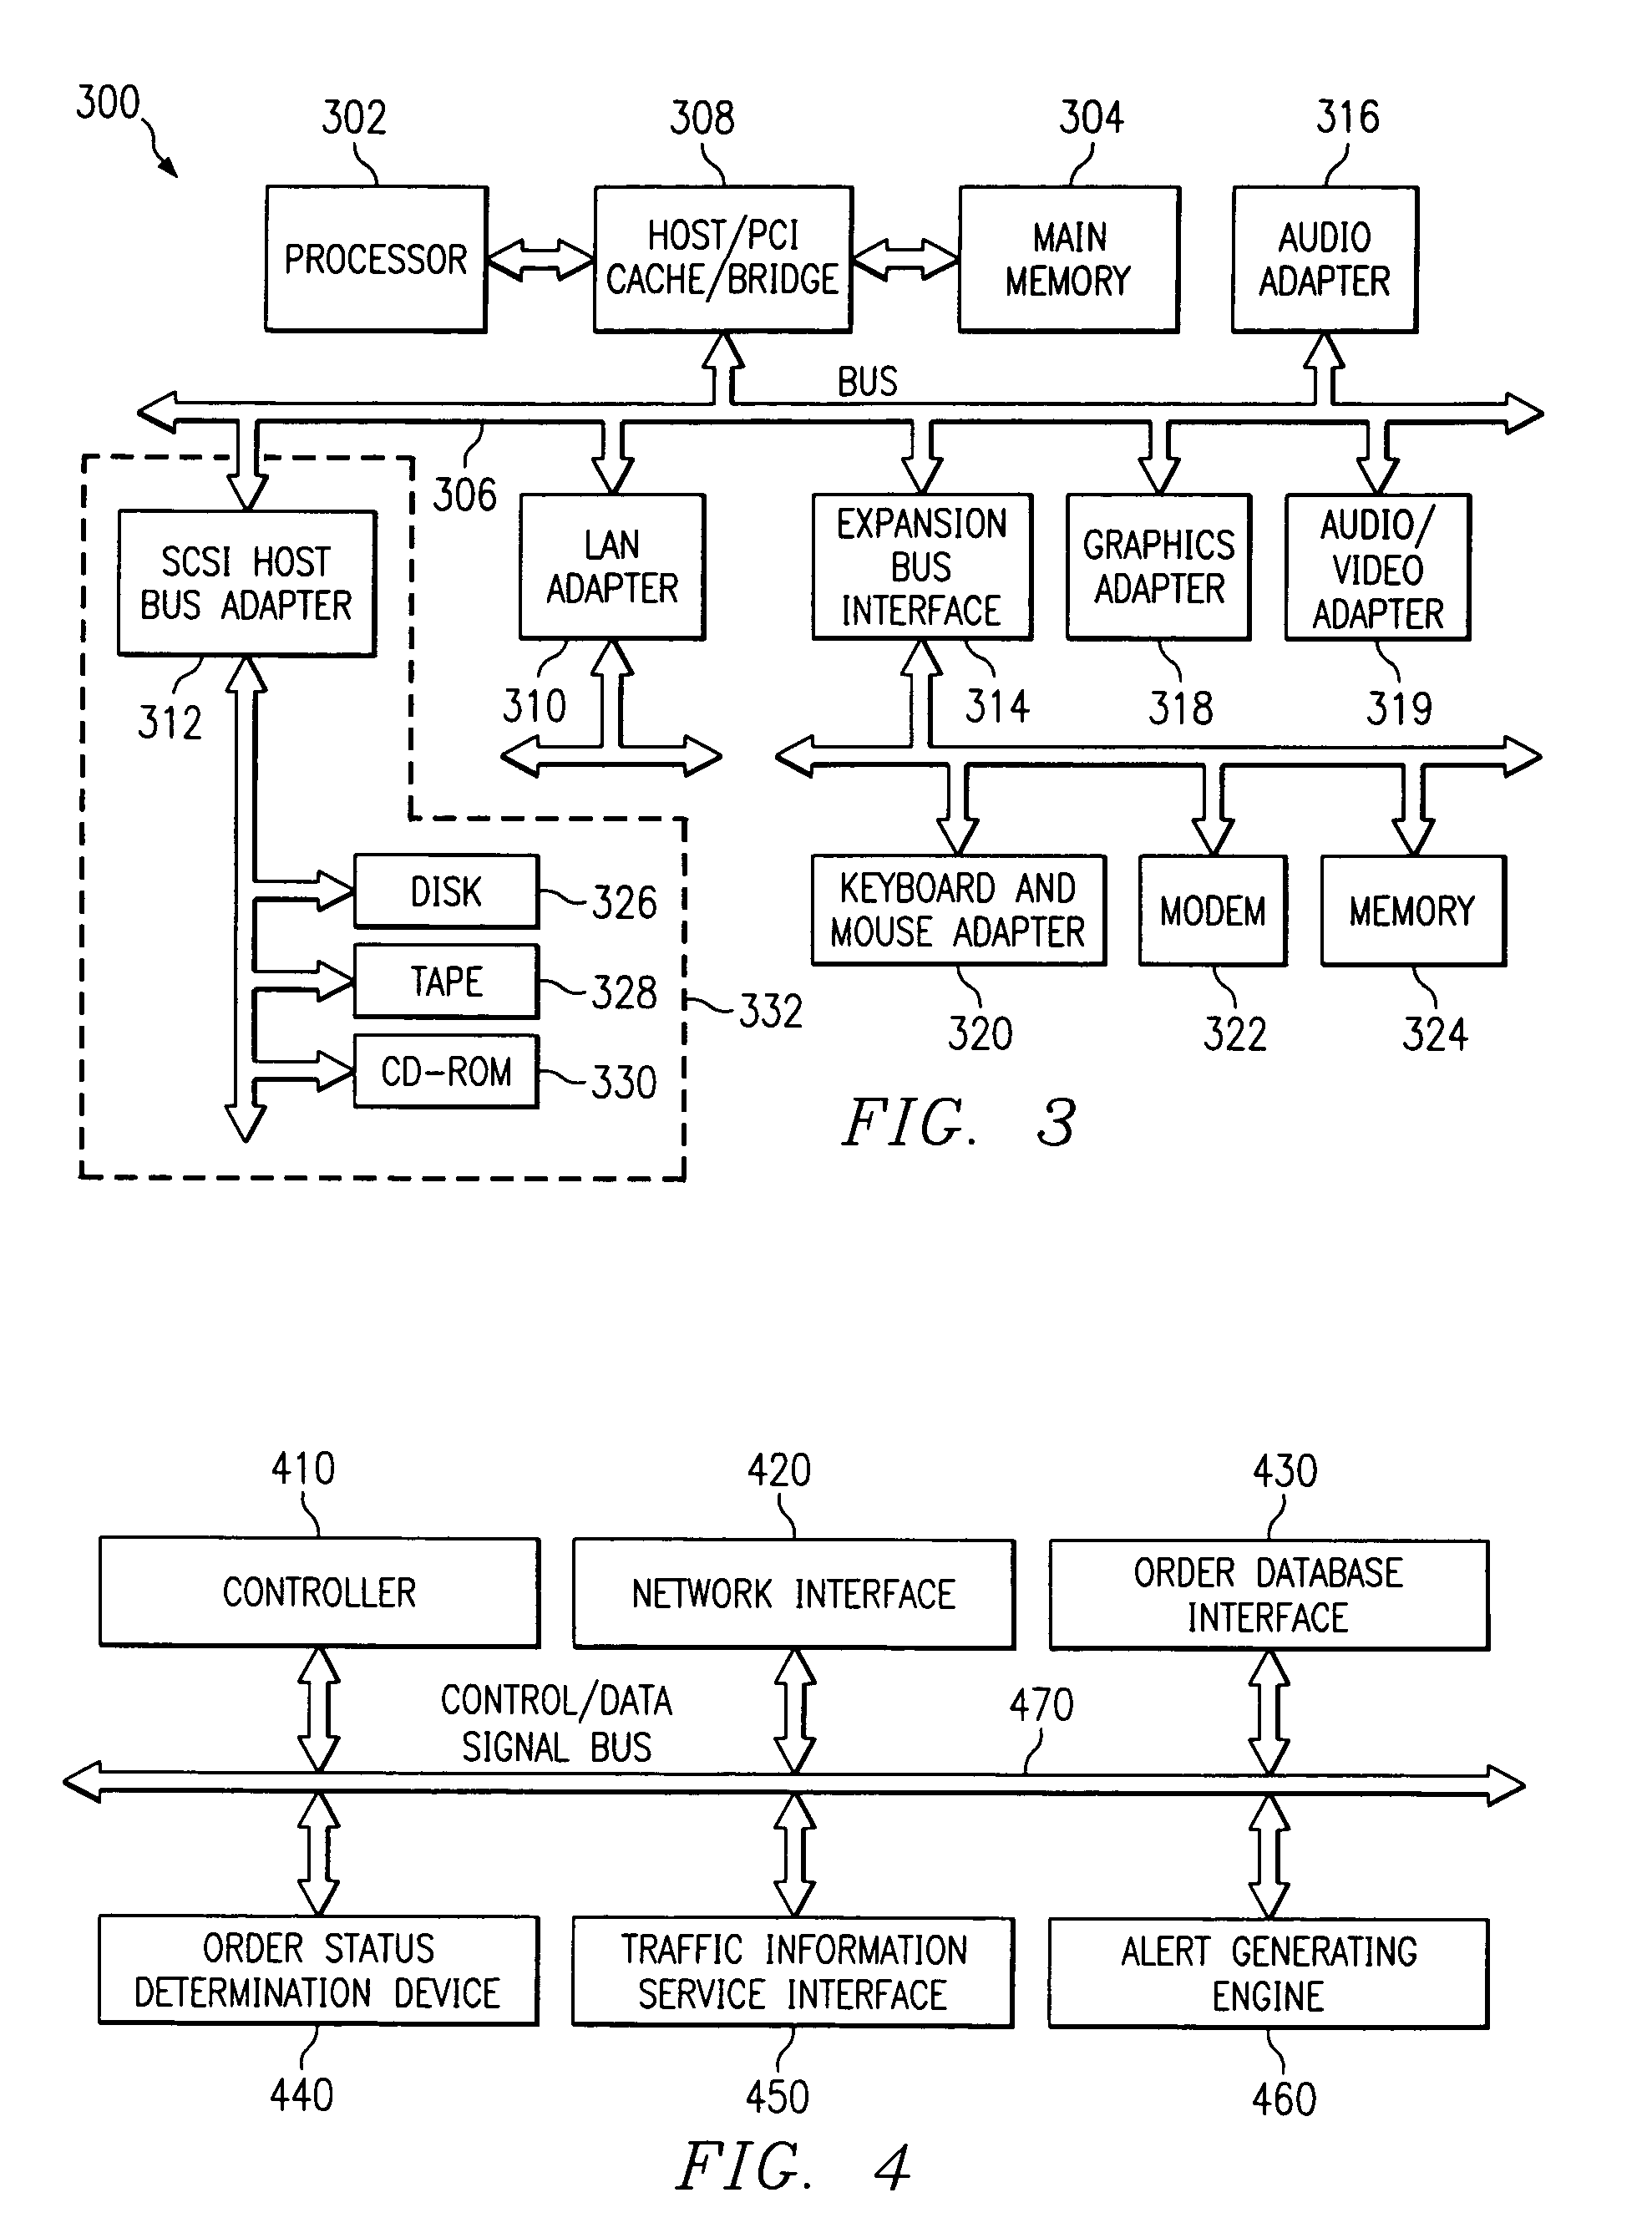 Apparatus and methods for providing fine granularity alerting to customers